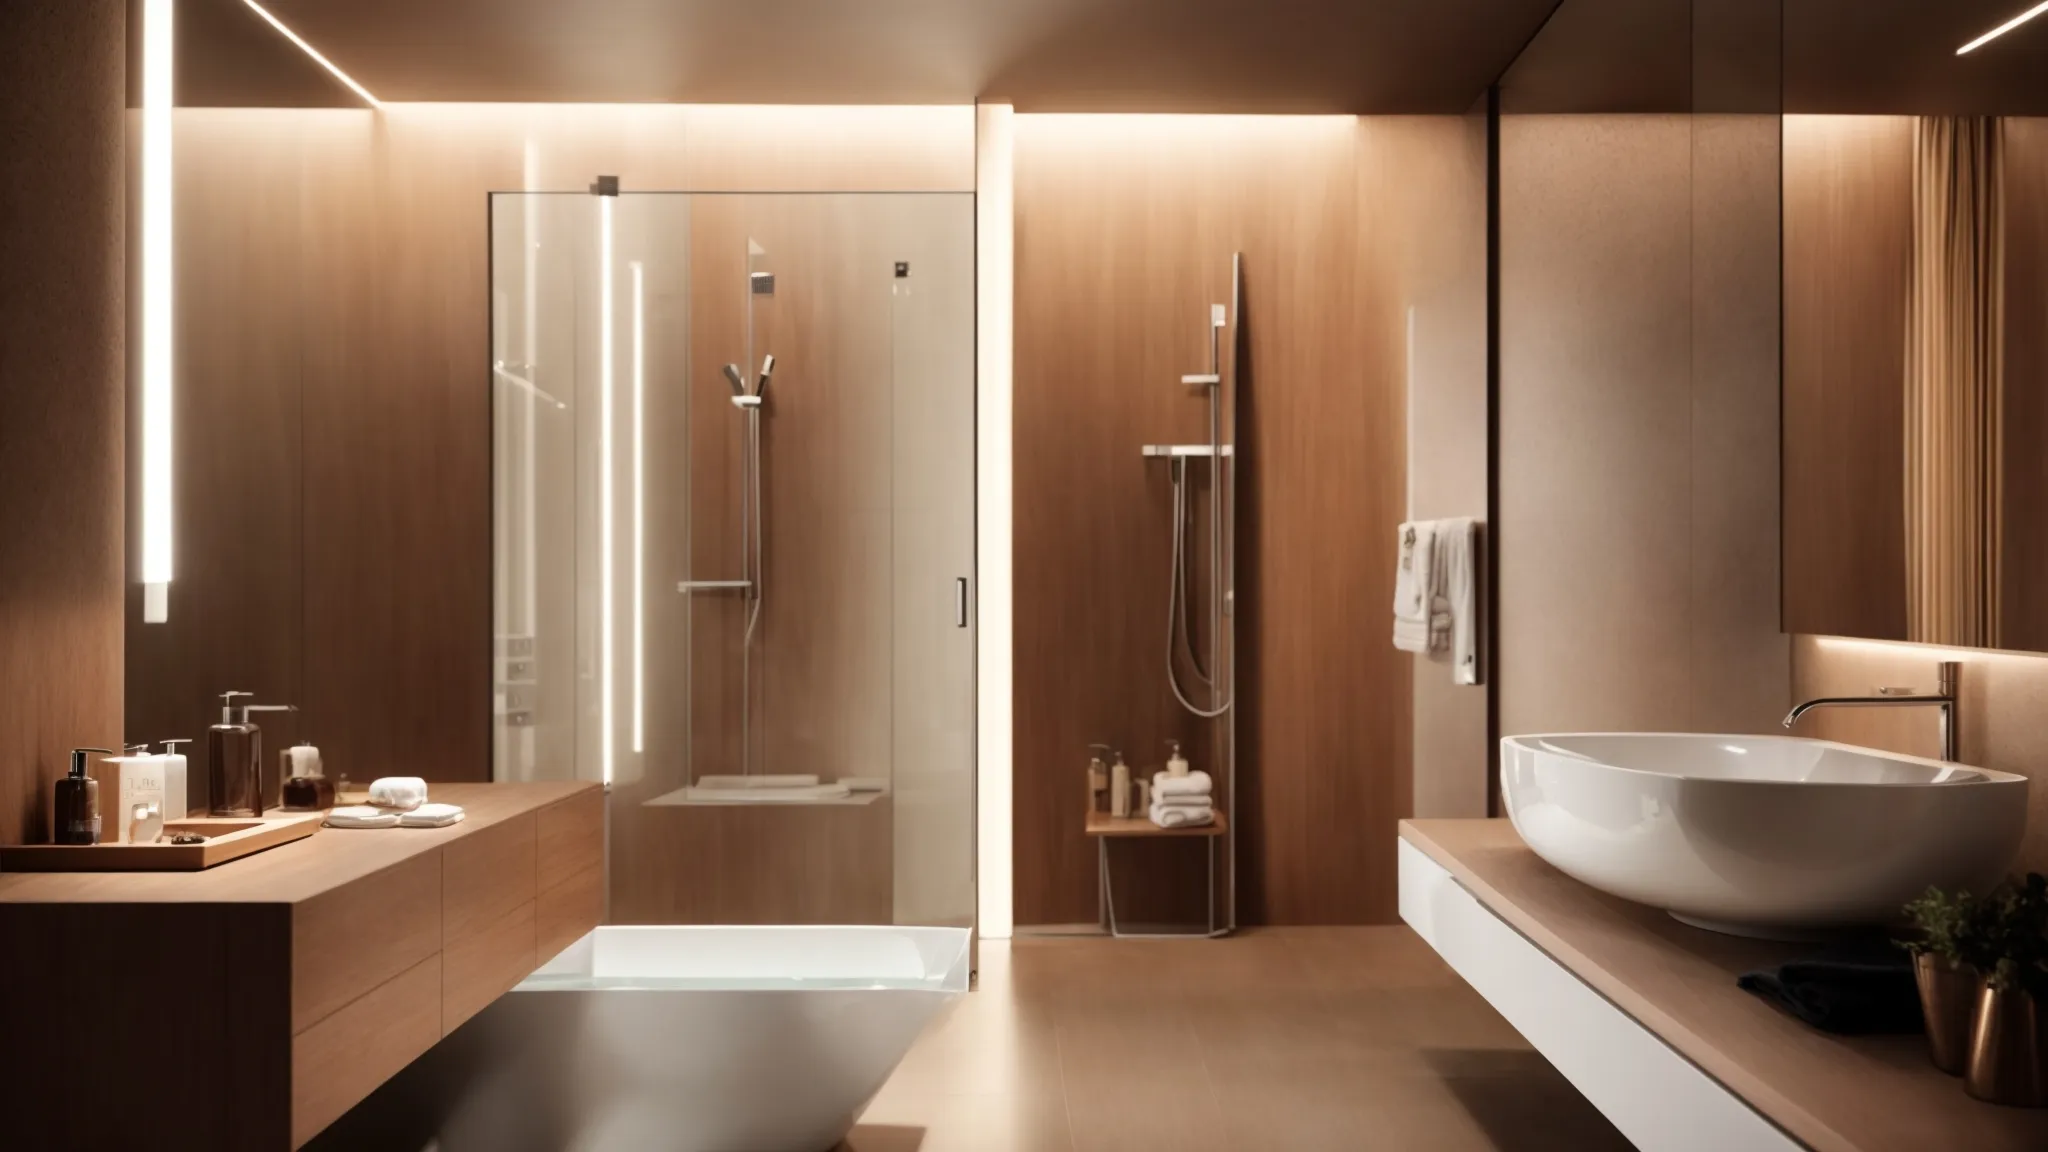 a modern, spacious bathroom featuring a sleek digital shower panel and ambient lighting glowing softly around a mirror.